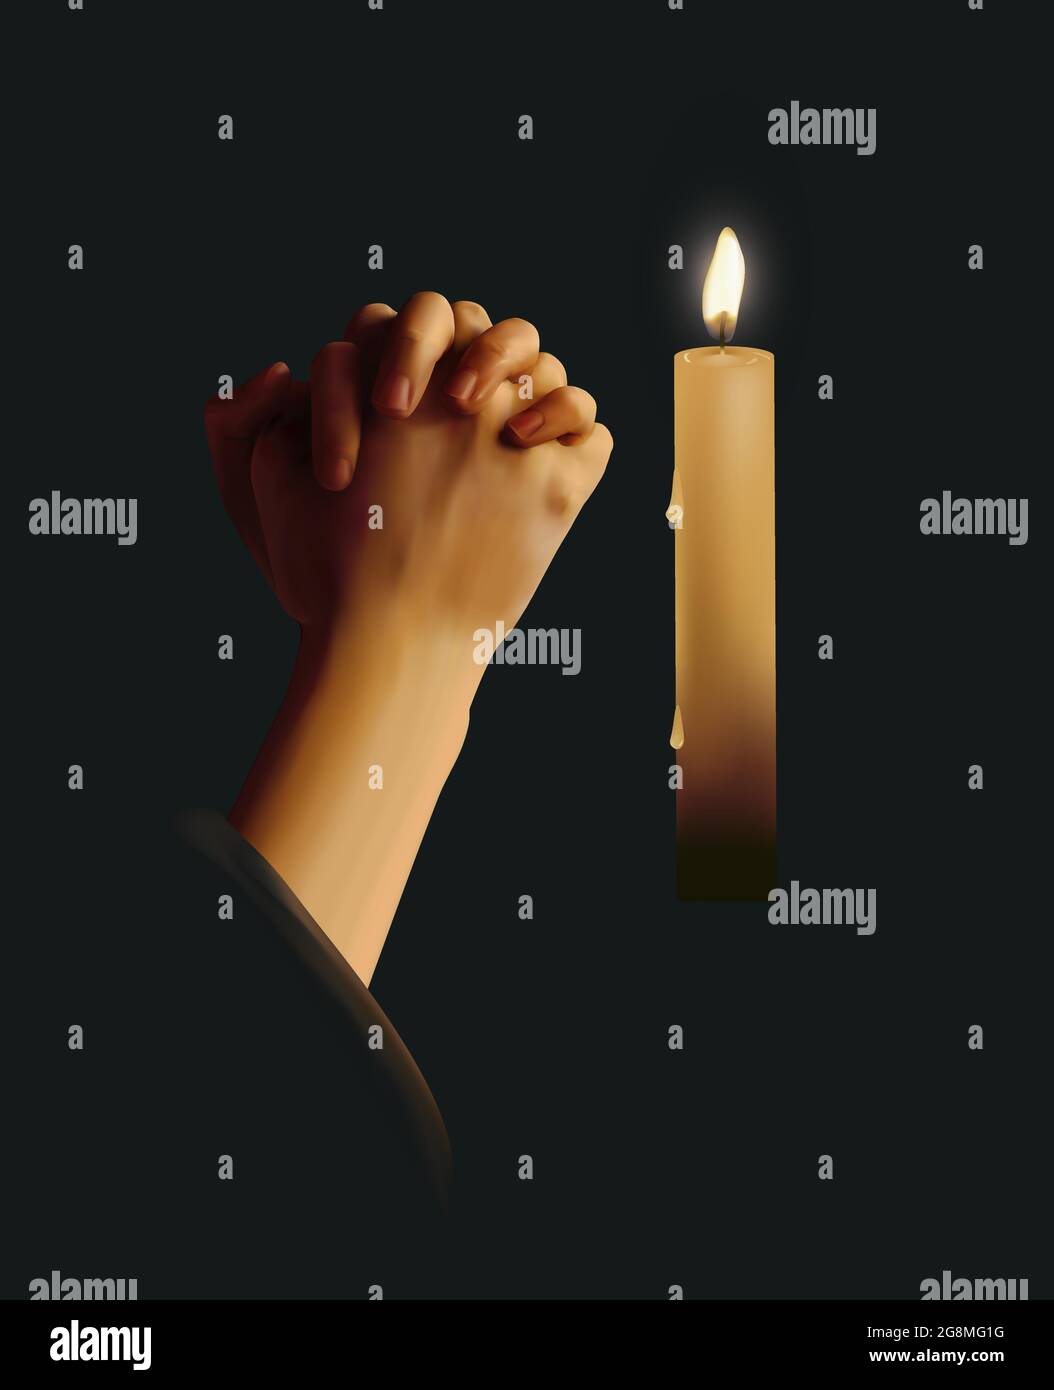 Realistic vector illustration of hands clasped in prayer with lit candle against dark background Stock Vector